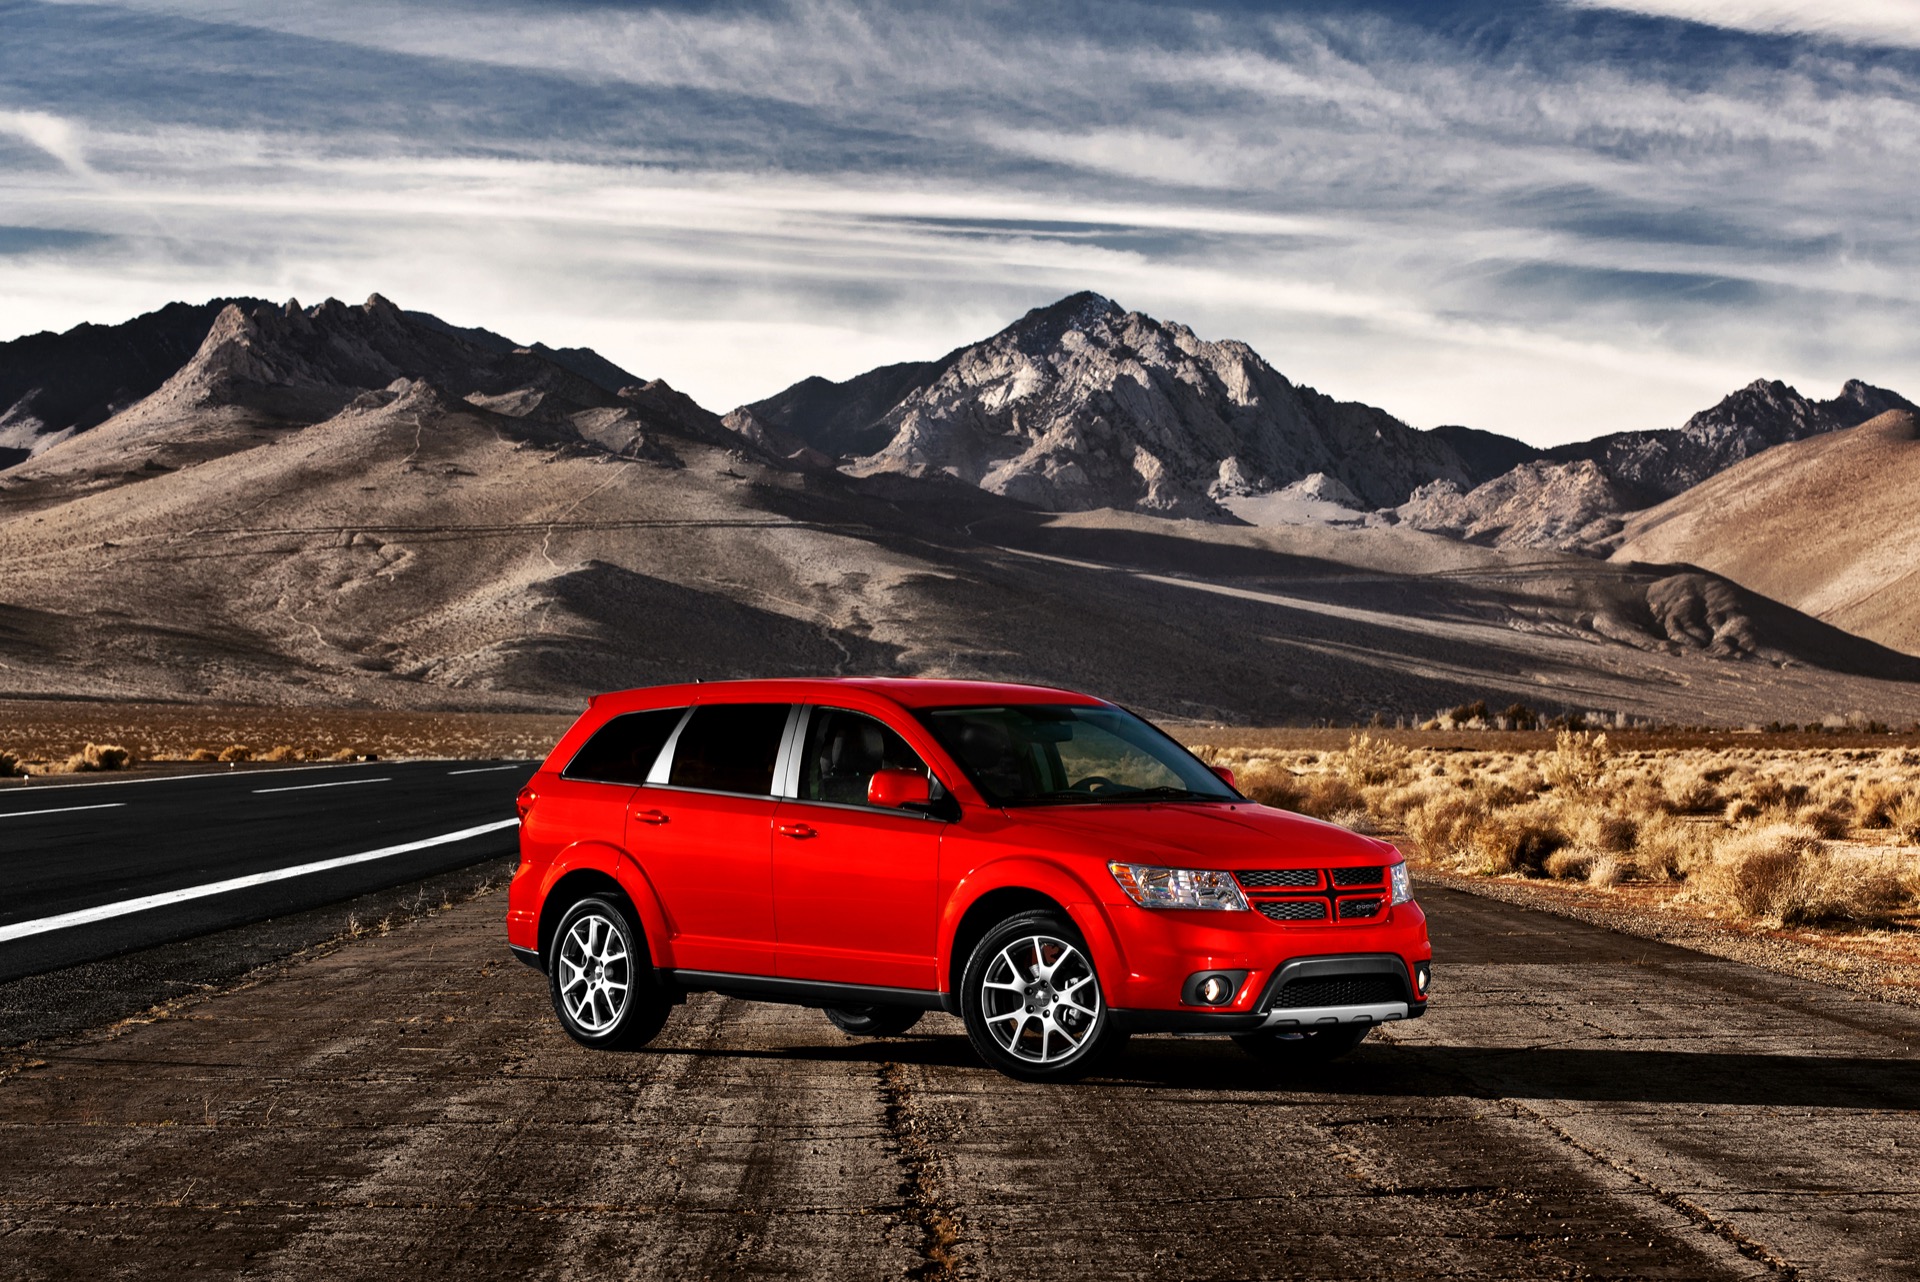 2016 Dodge Journey Review, Ratings, Specs, Prices, and Photos - The Car